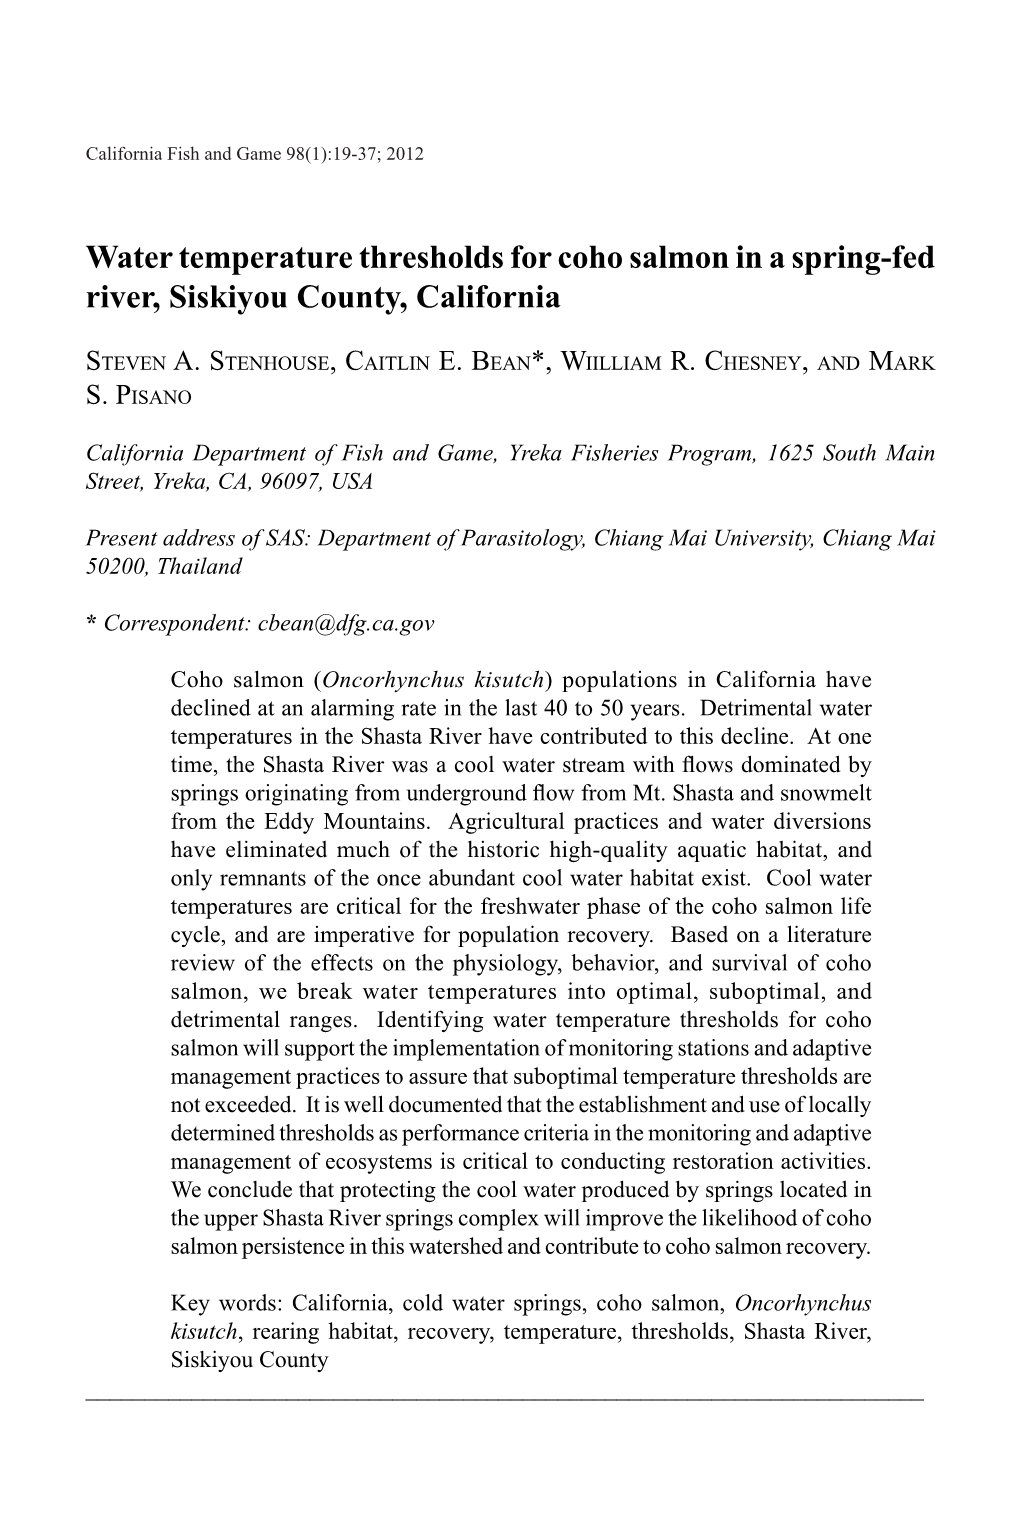 Water Temperature Thresholds for Coho Salmon in a Spring-Fed River, Siskiyou County, California